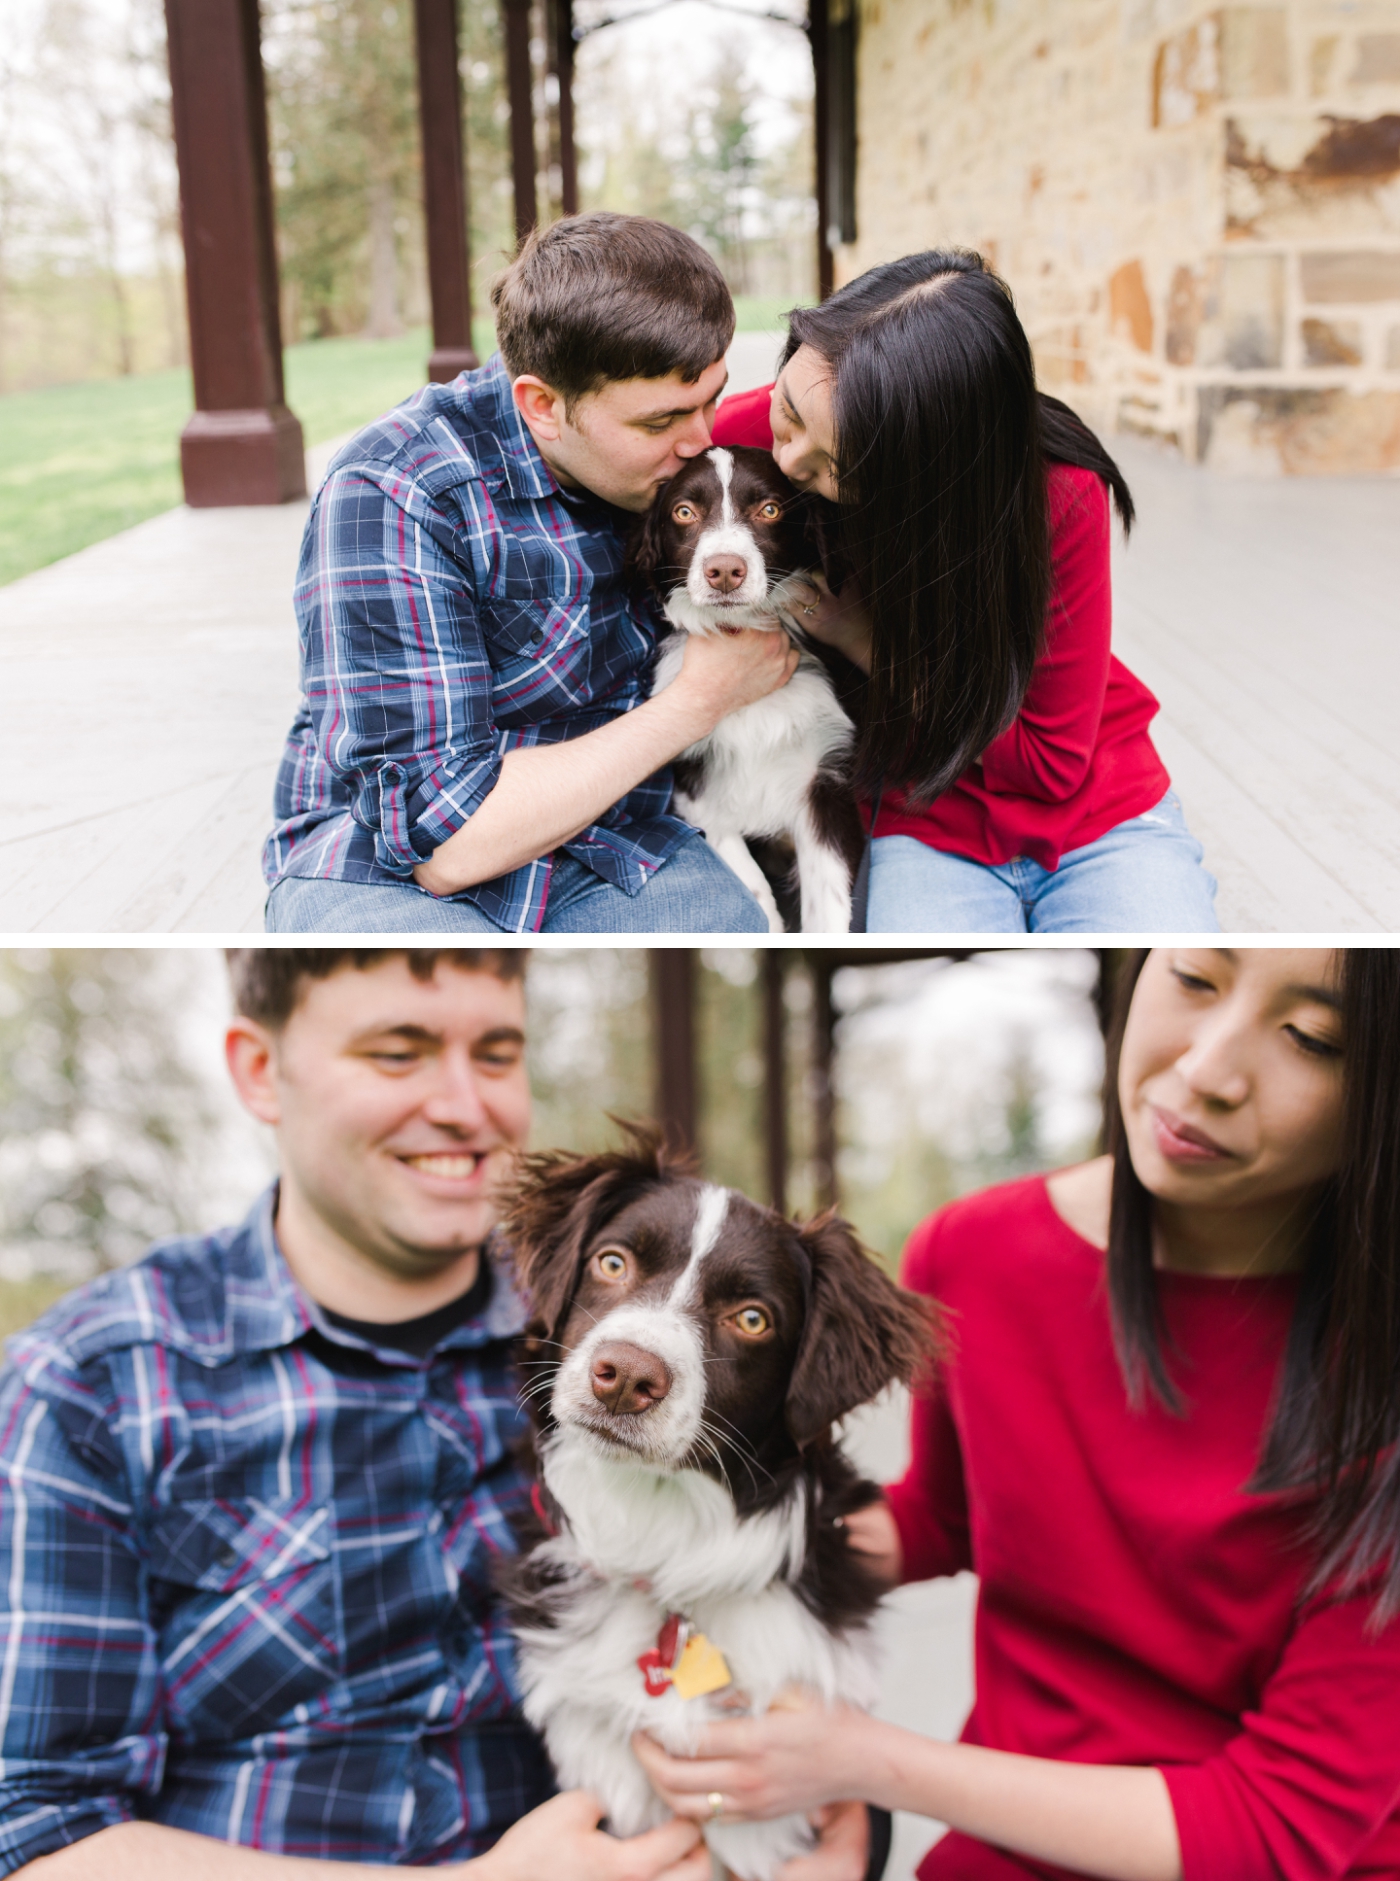 Engagement session poses with a dog